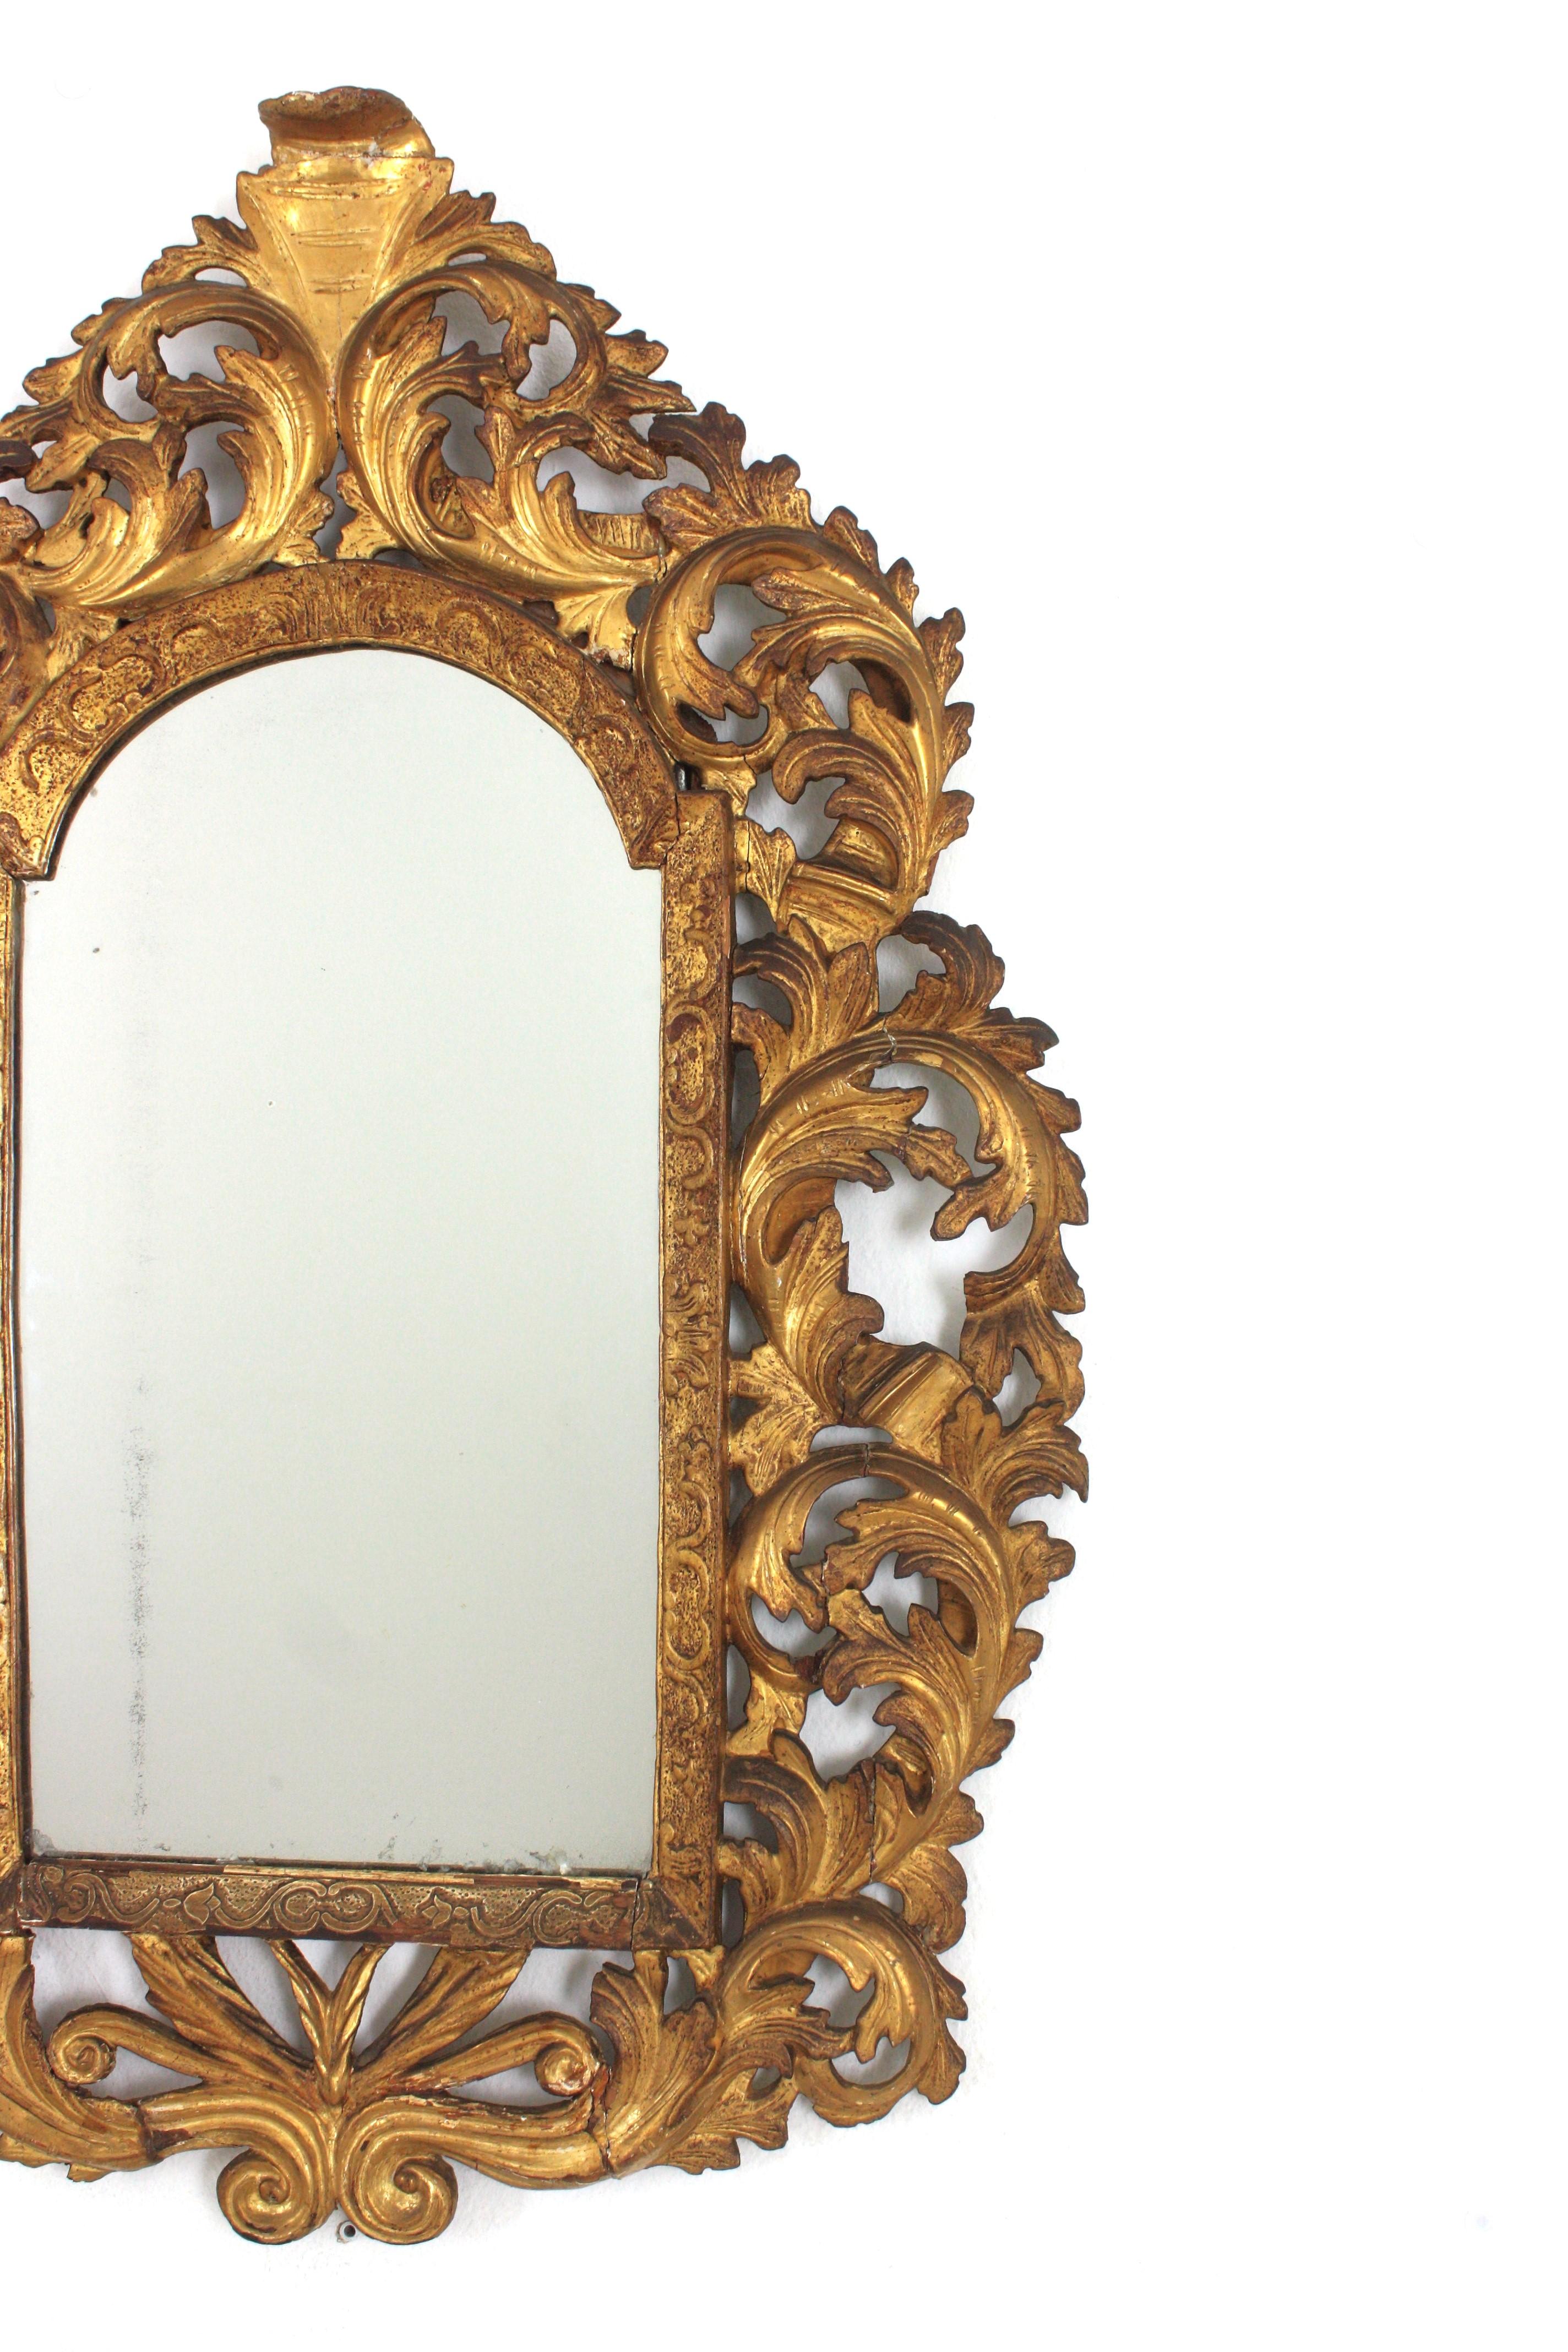 Gesso Florentine Giltwood Mirror with Foliage Frame and Arched Top For Sale